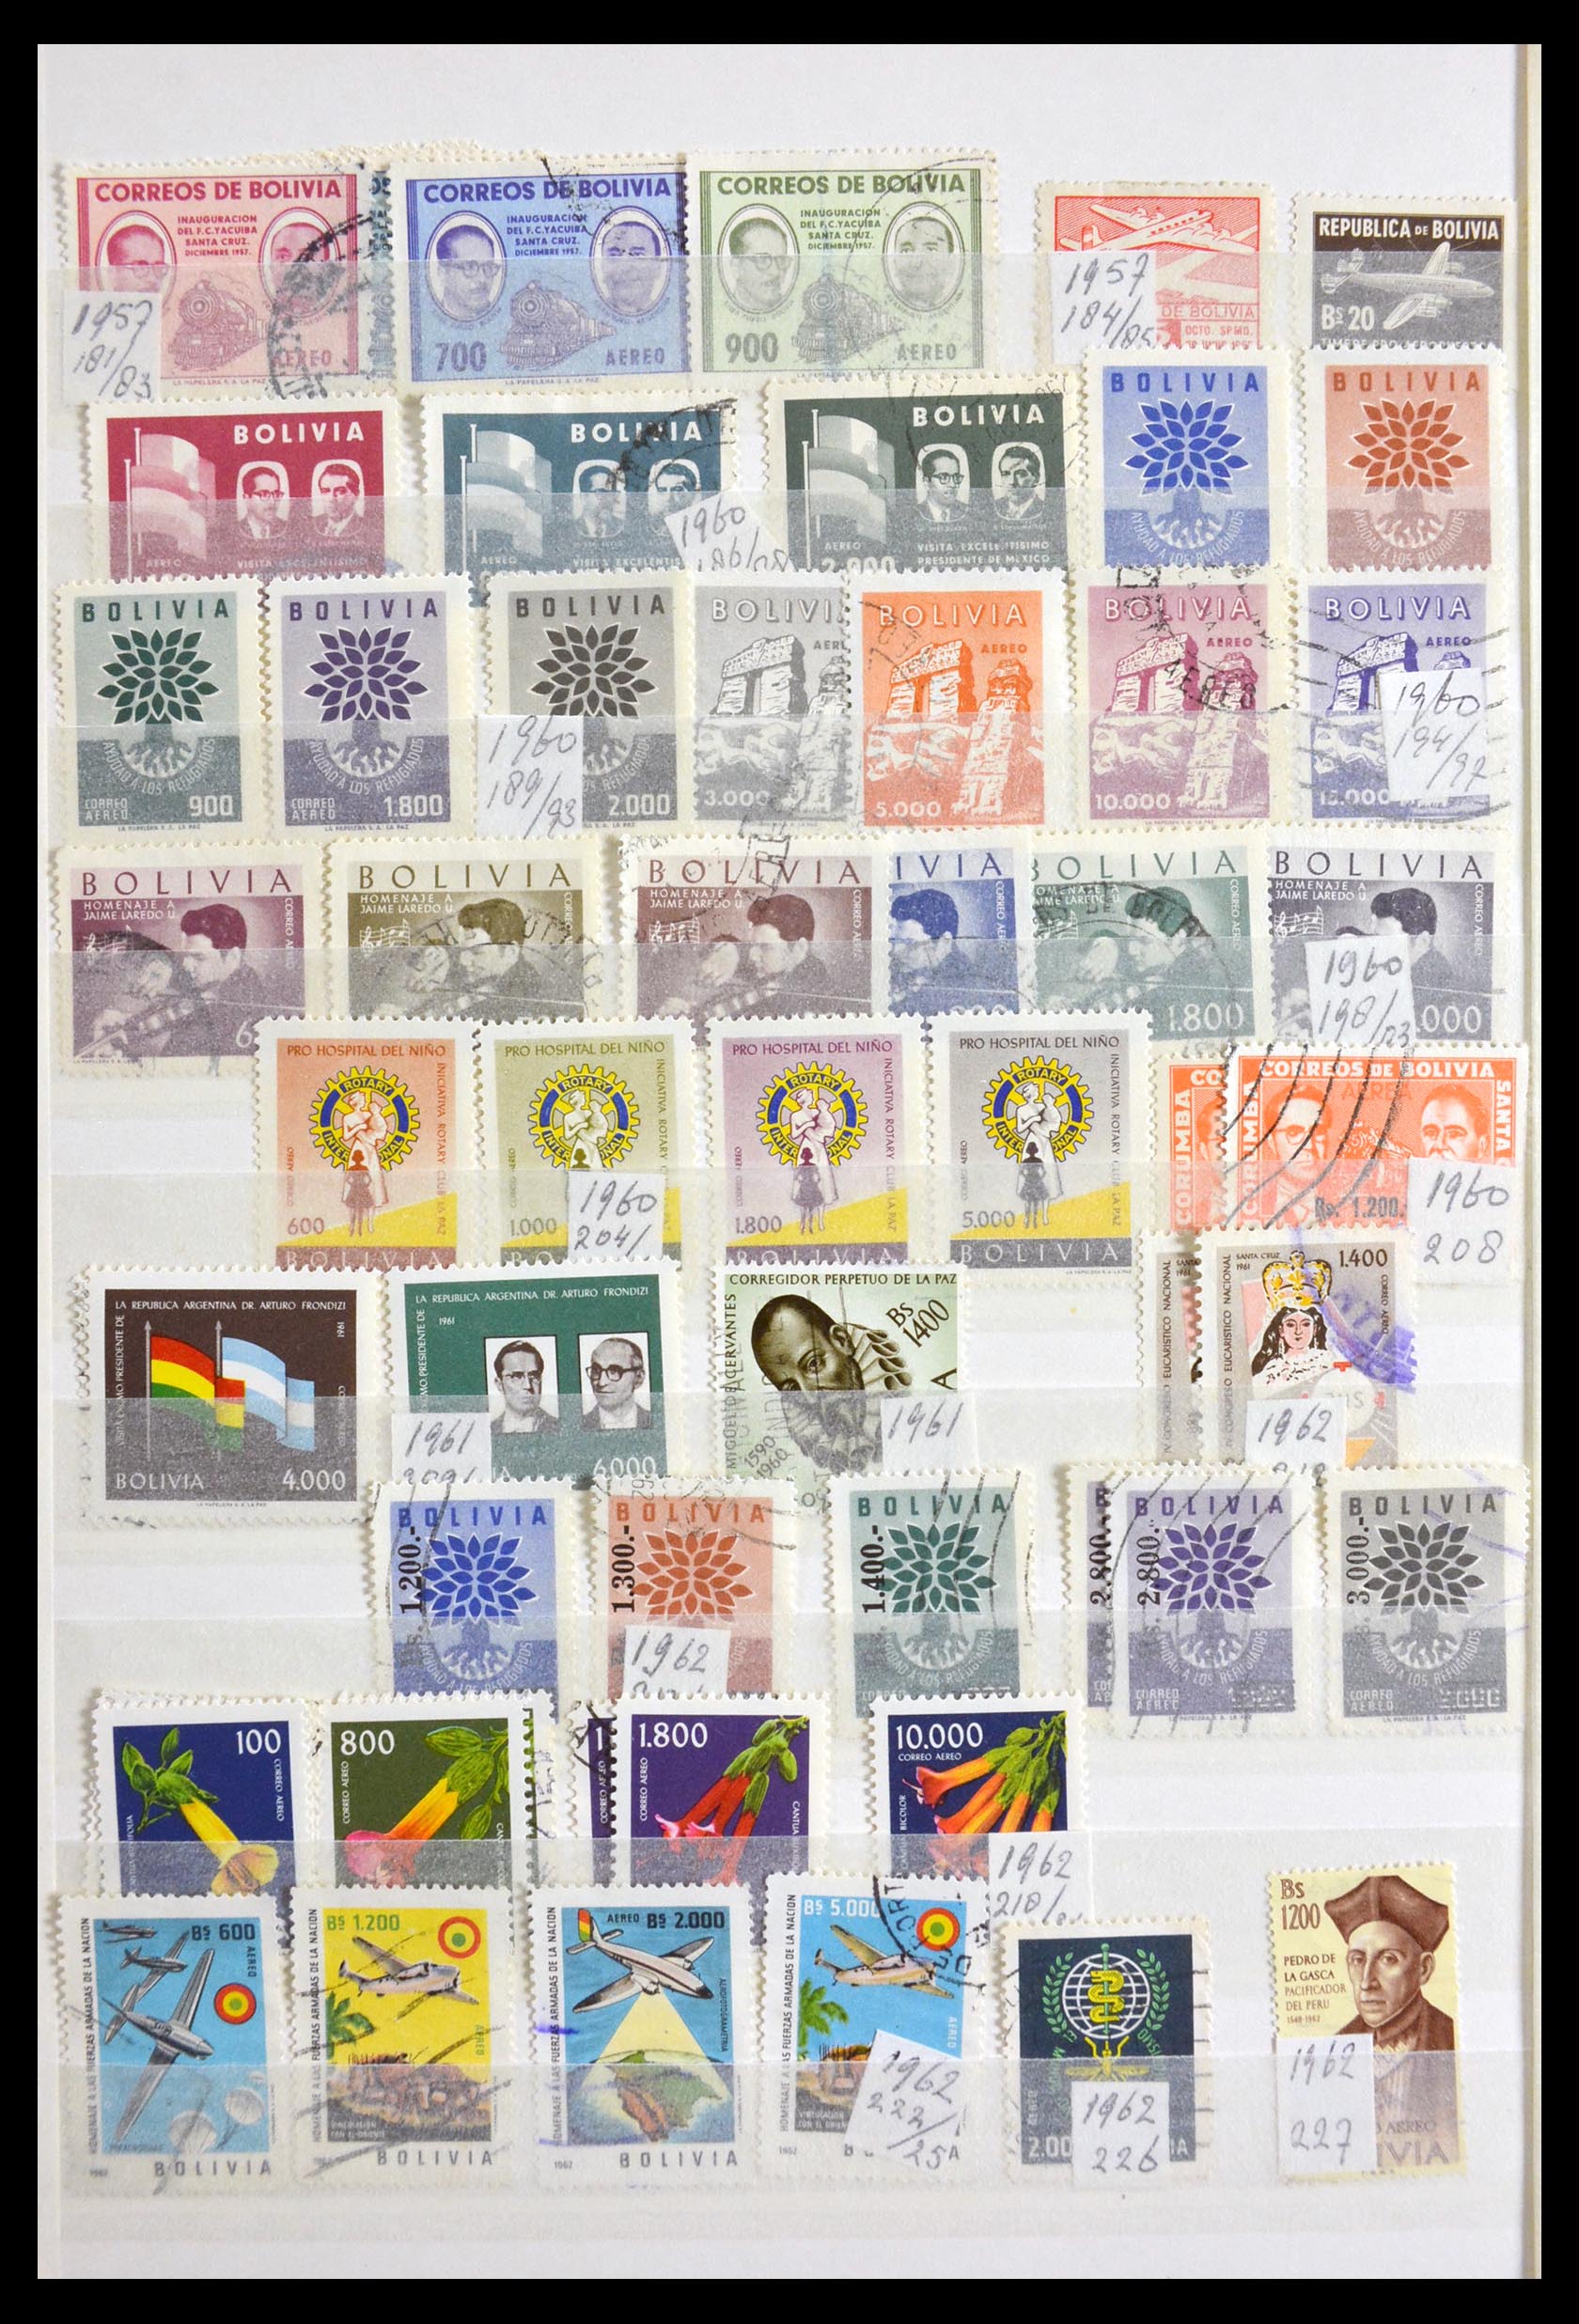 29917 020 - 29917 Latin America airmail stamps.